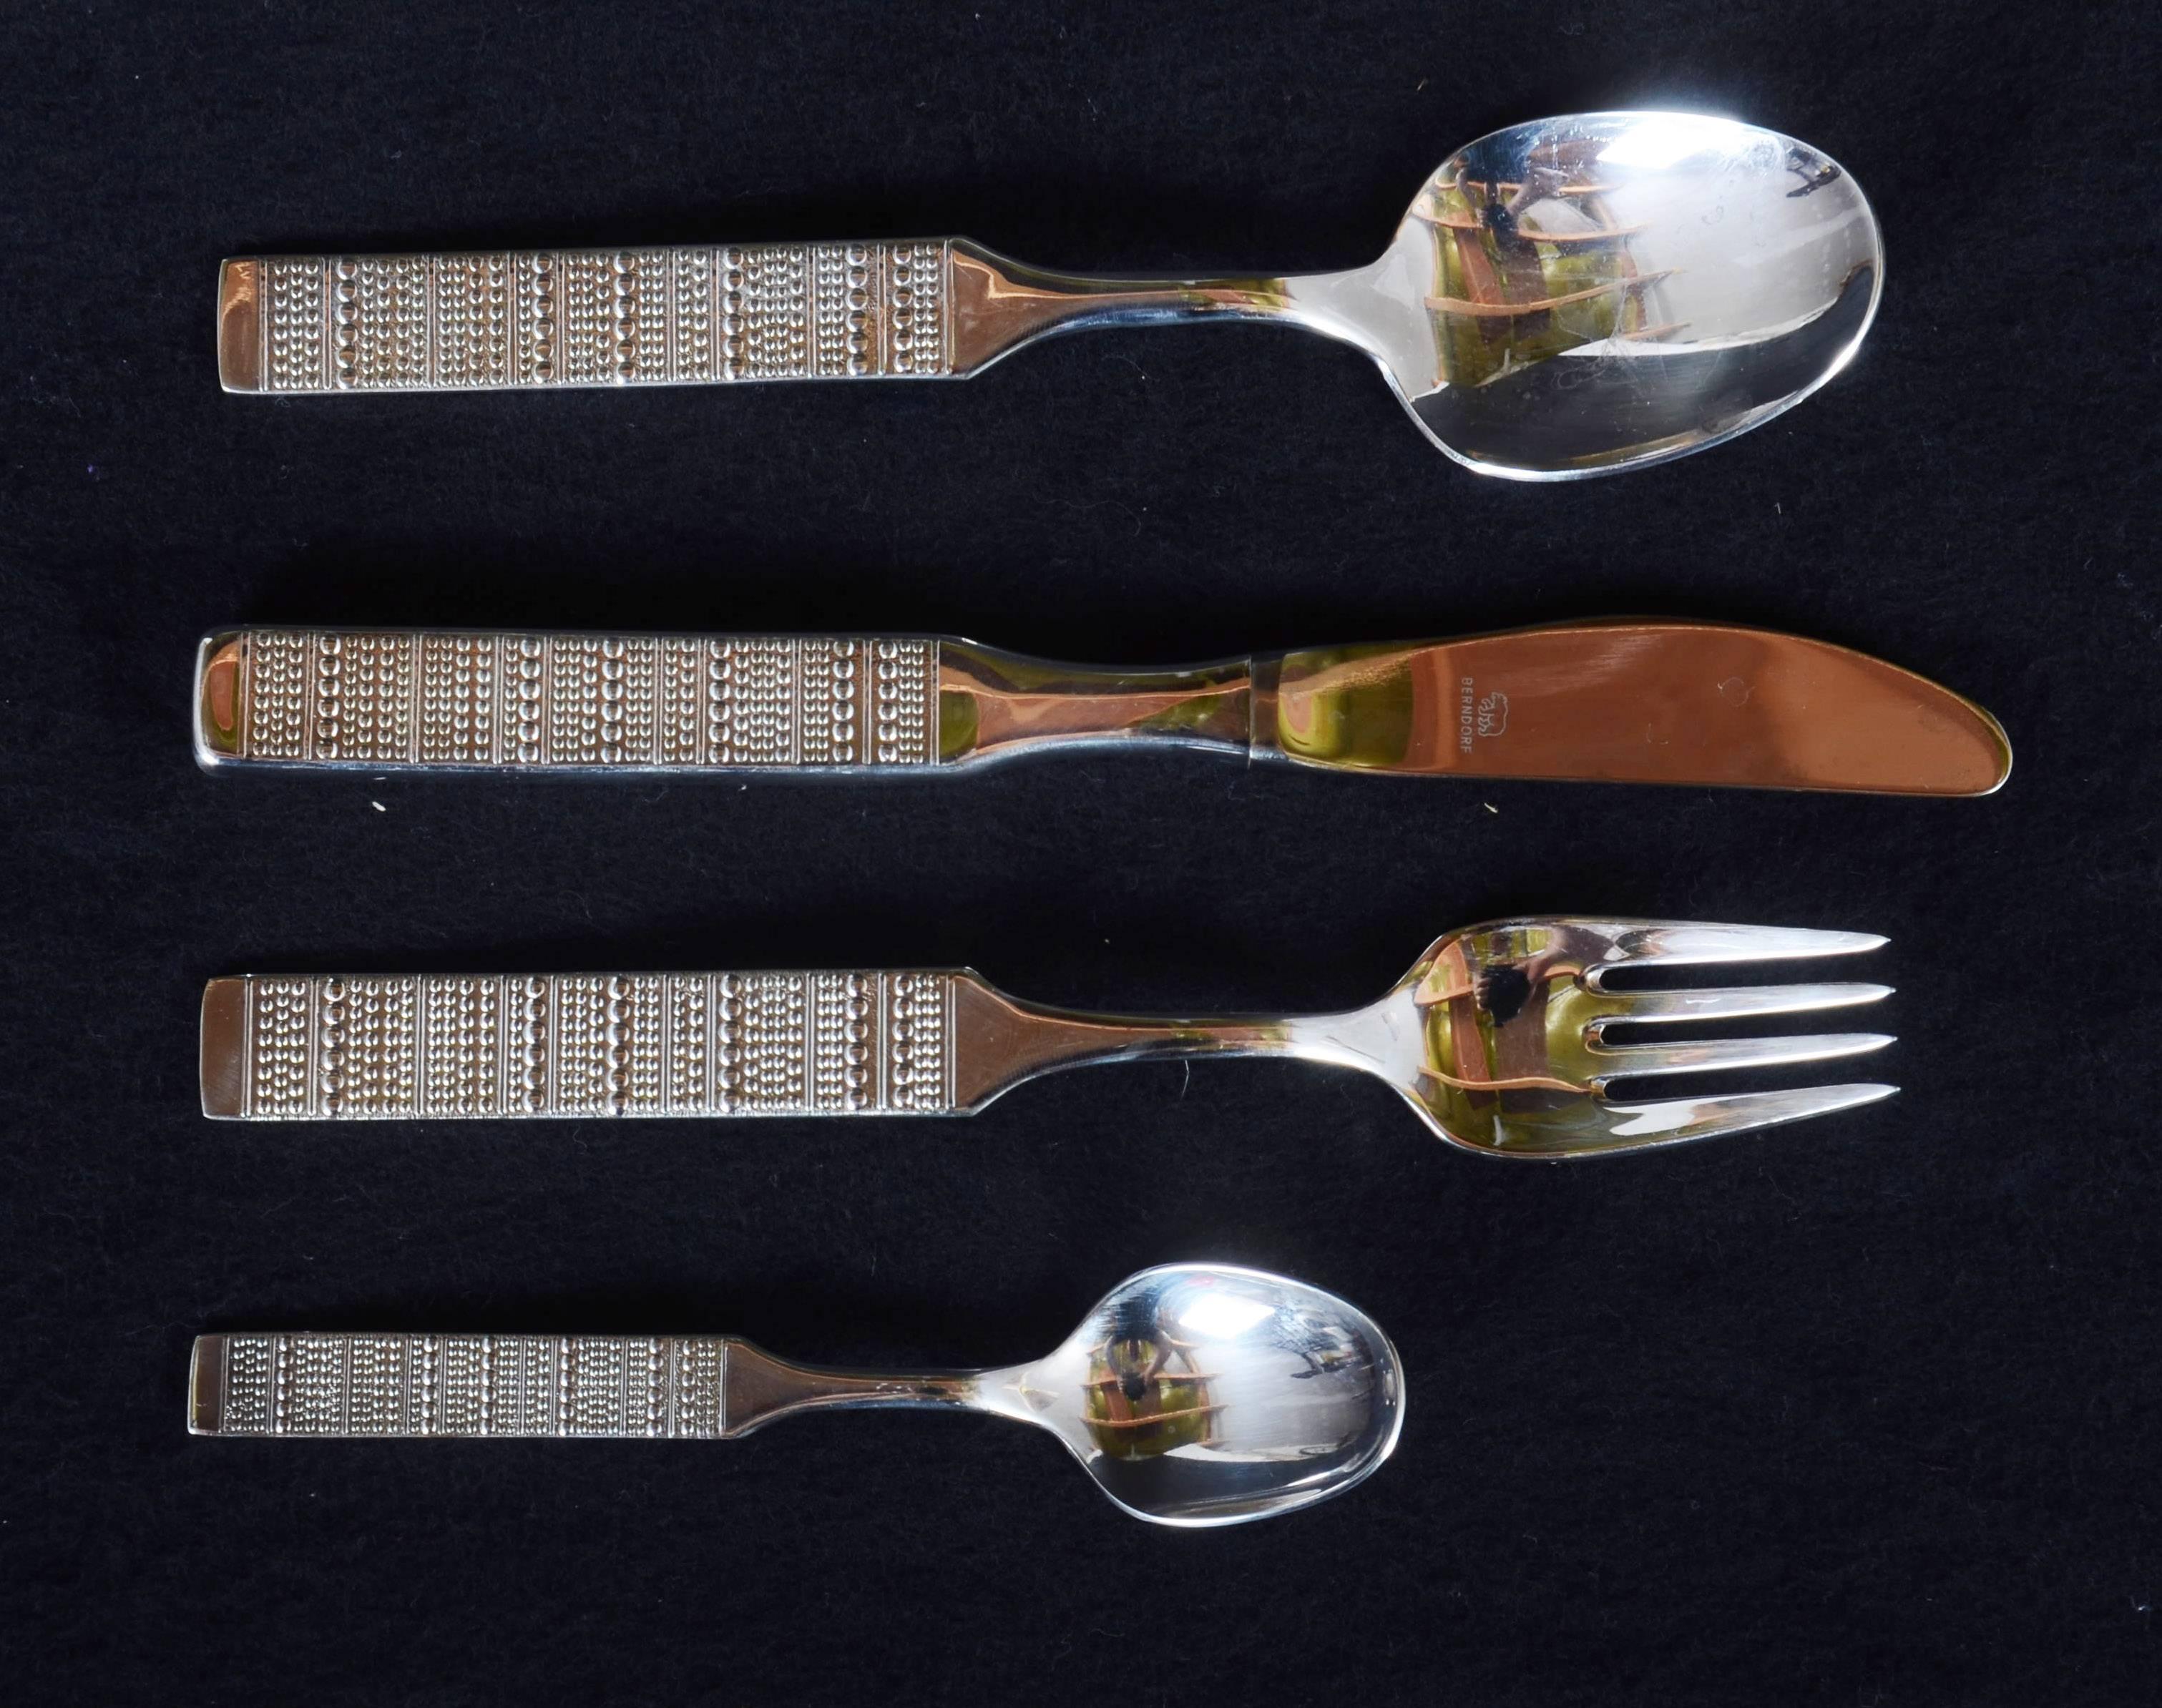 Austrian high-quality flatware silver plated by Berndorf, former Krupp Company from the 1960s. The cutlery has a handle with a very interesting geometric decor. Used but in excellent condition, some in near new condition.
Two sets each 24 pieces